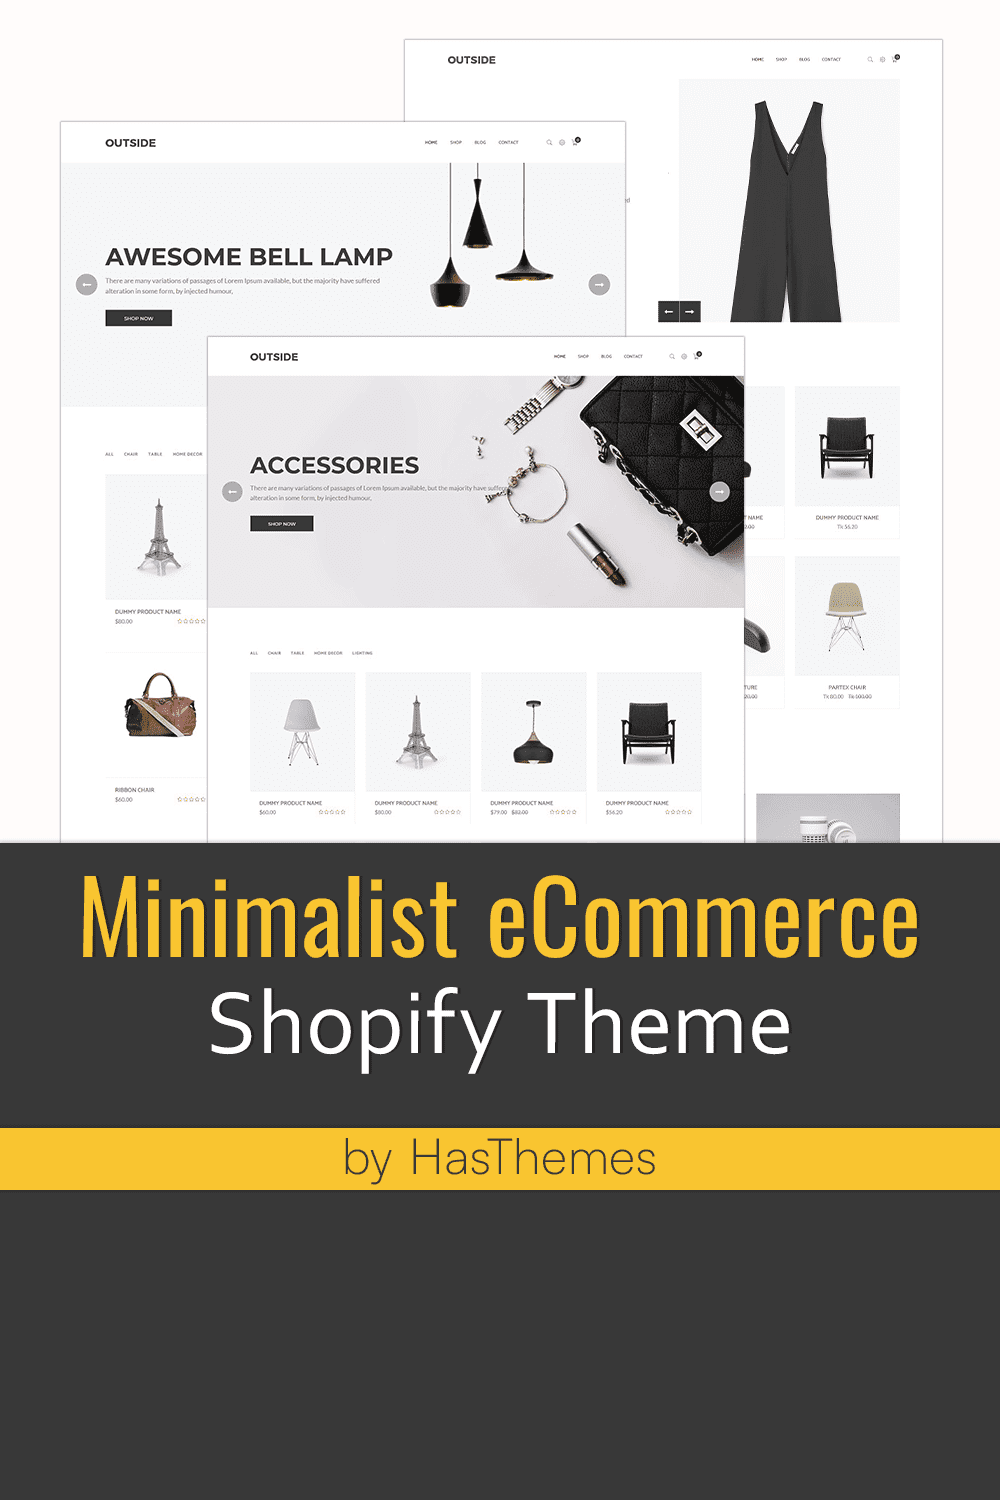 Minimalist ecommerce shopify theme, picture for Pinterest.